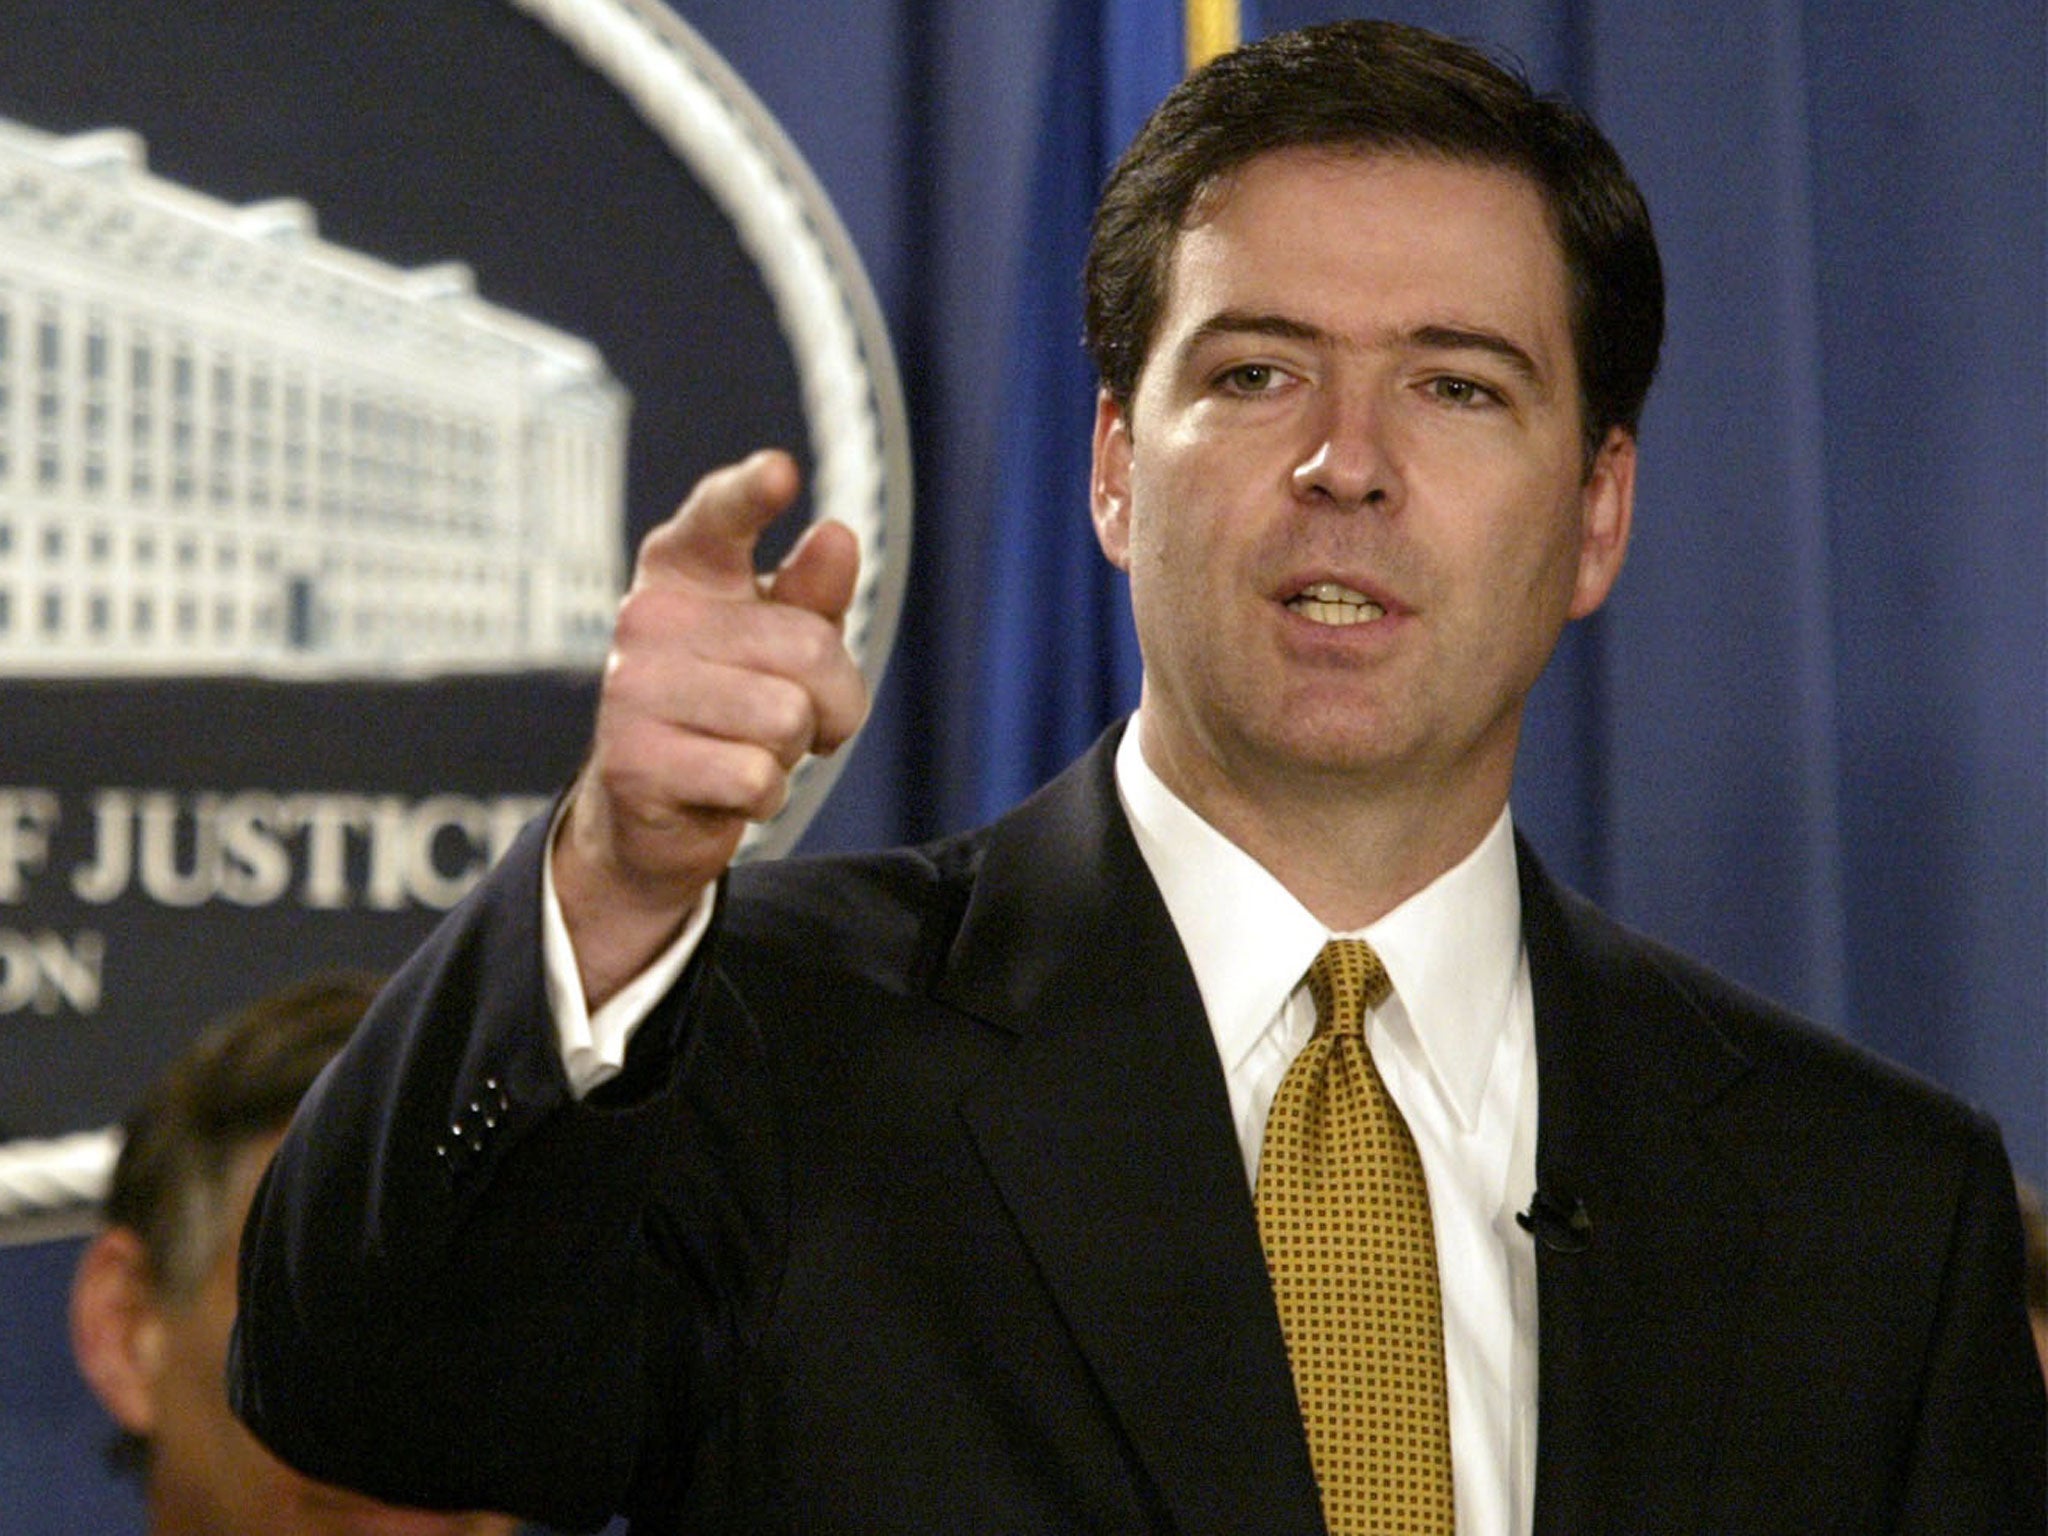 James Comey, the director of the Federal Bureau of Investigation